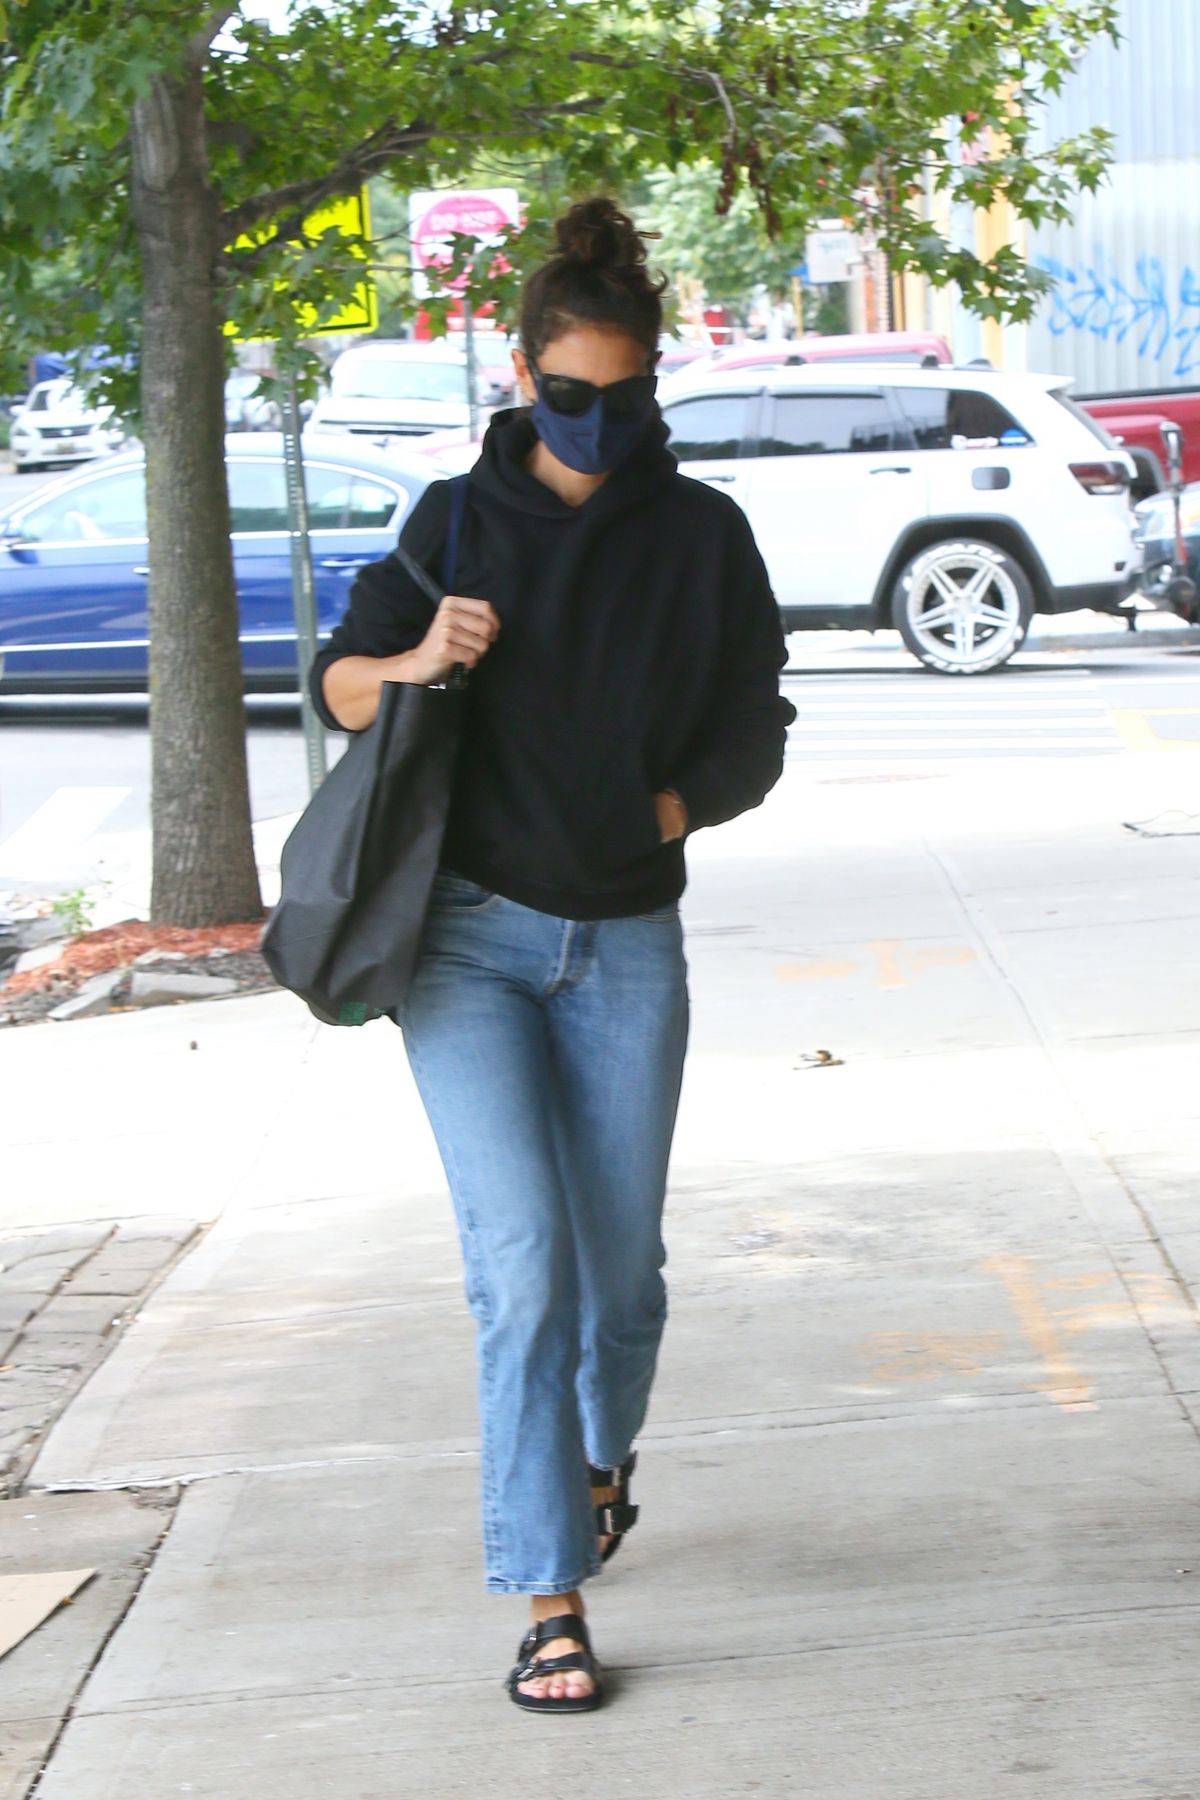 katie-holmes-out-in-new-york-08-21-2020-5.jpg